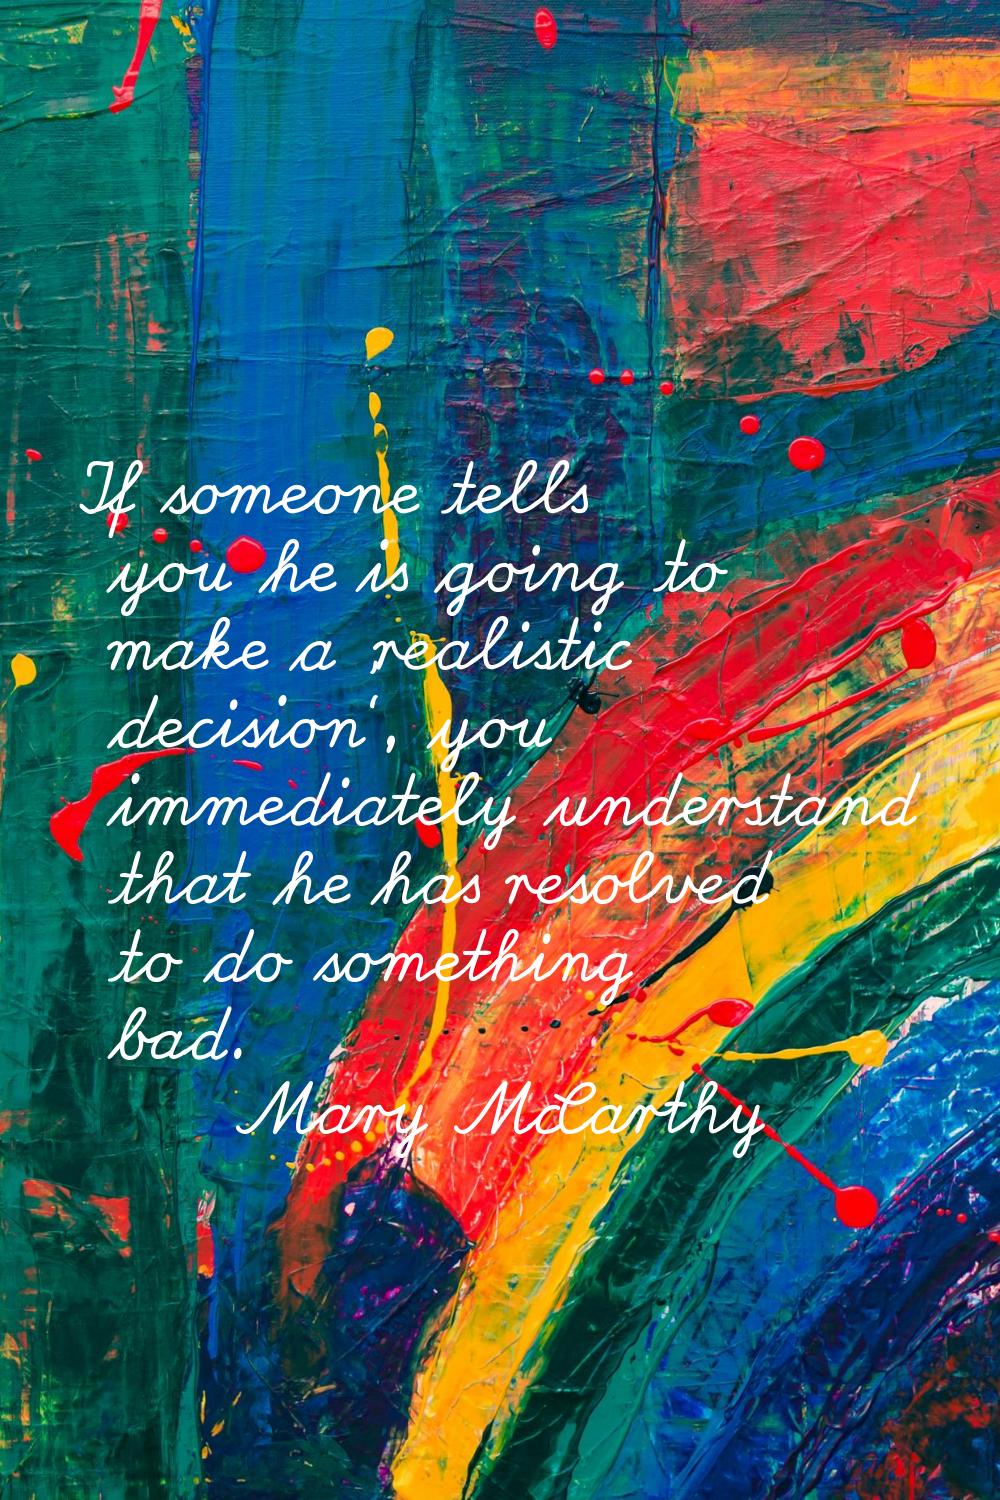 If someone tells you he is going to make a 'realistic decision', you immediately understand that he